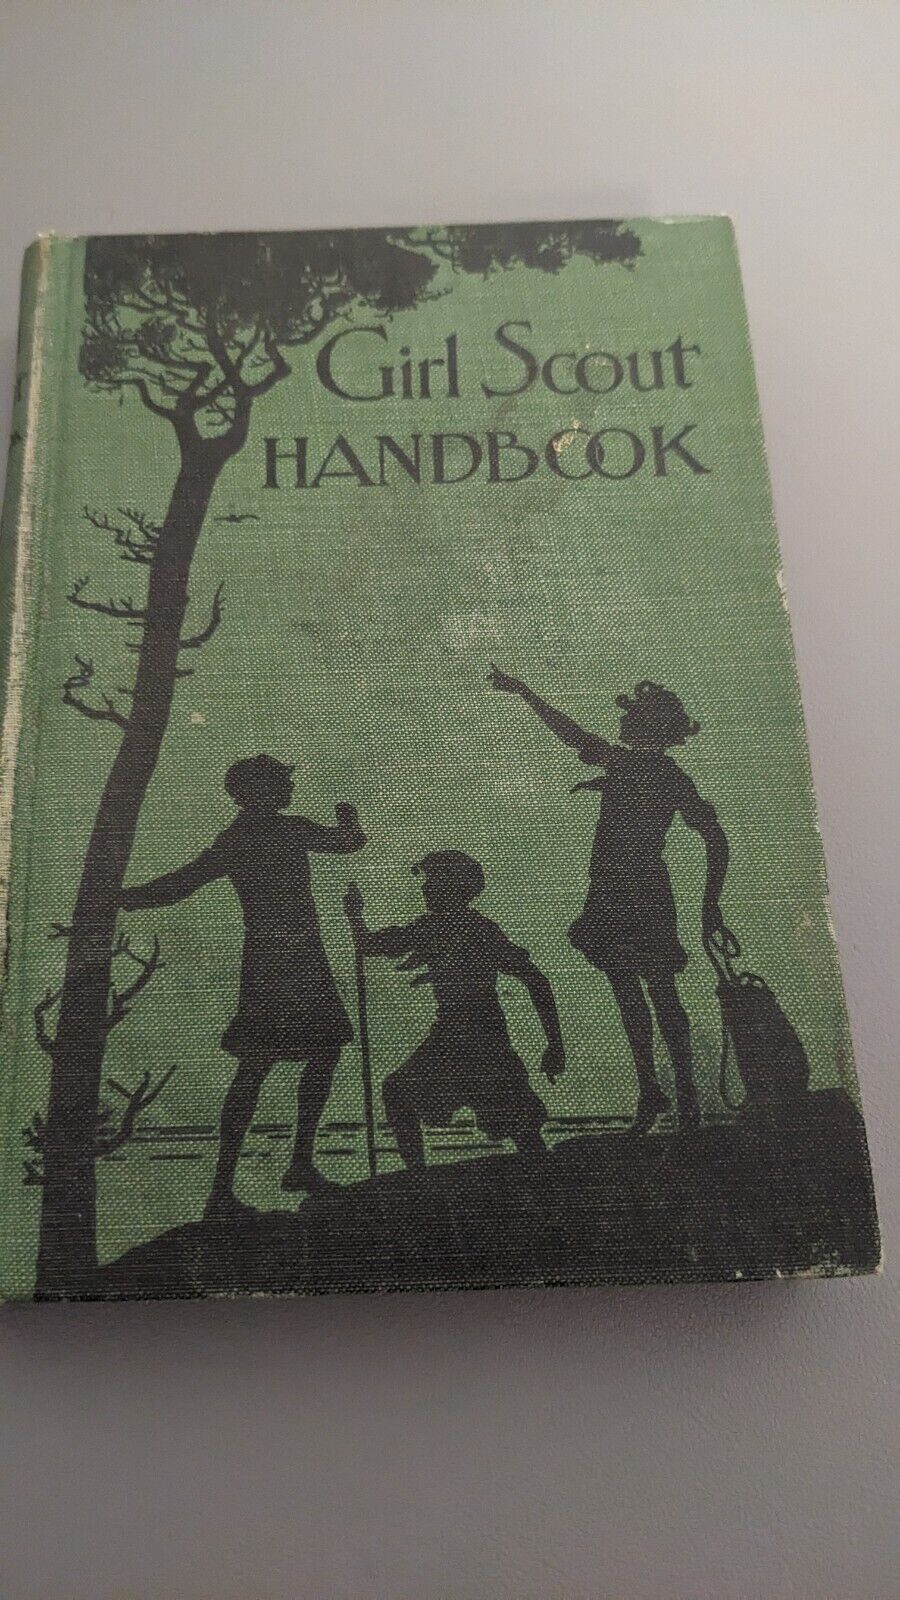 GIRL SCOUT HANDBOOK - REVISED EDITION 1930